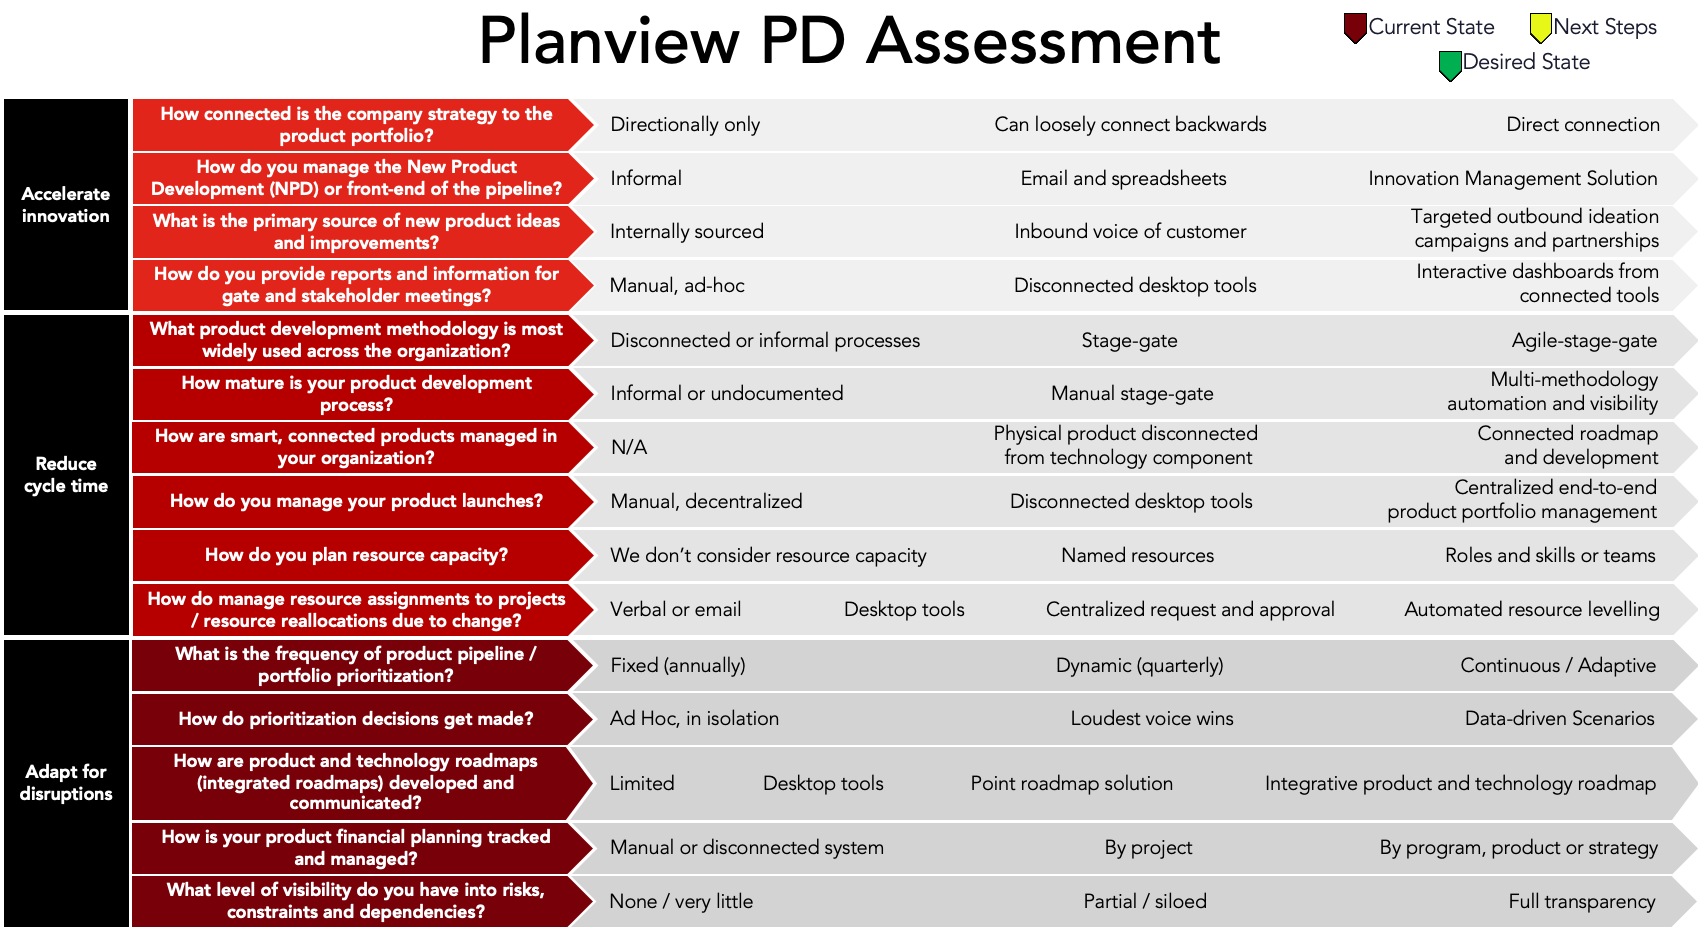 PD Assessment.png